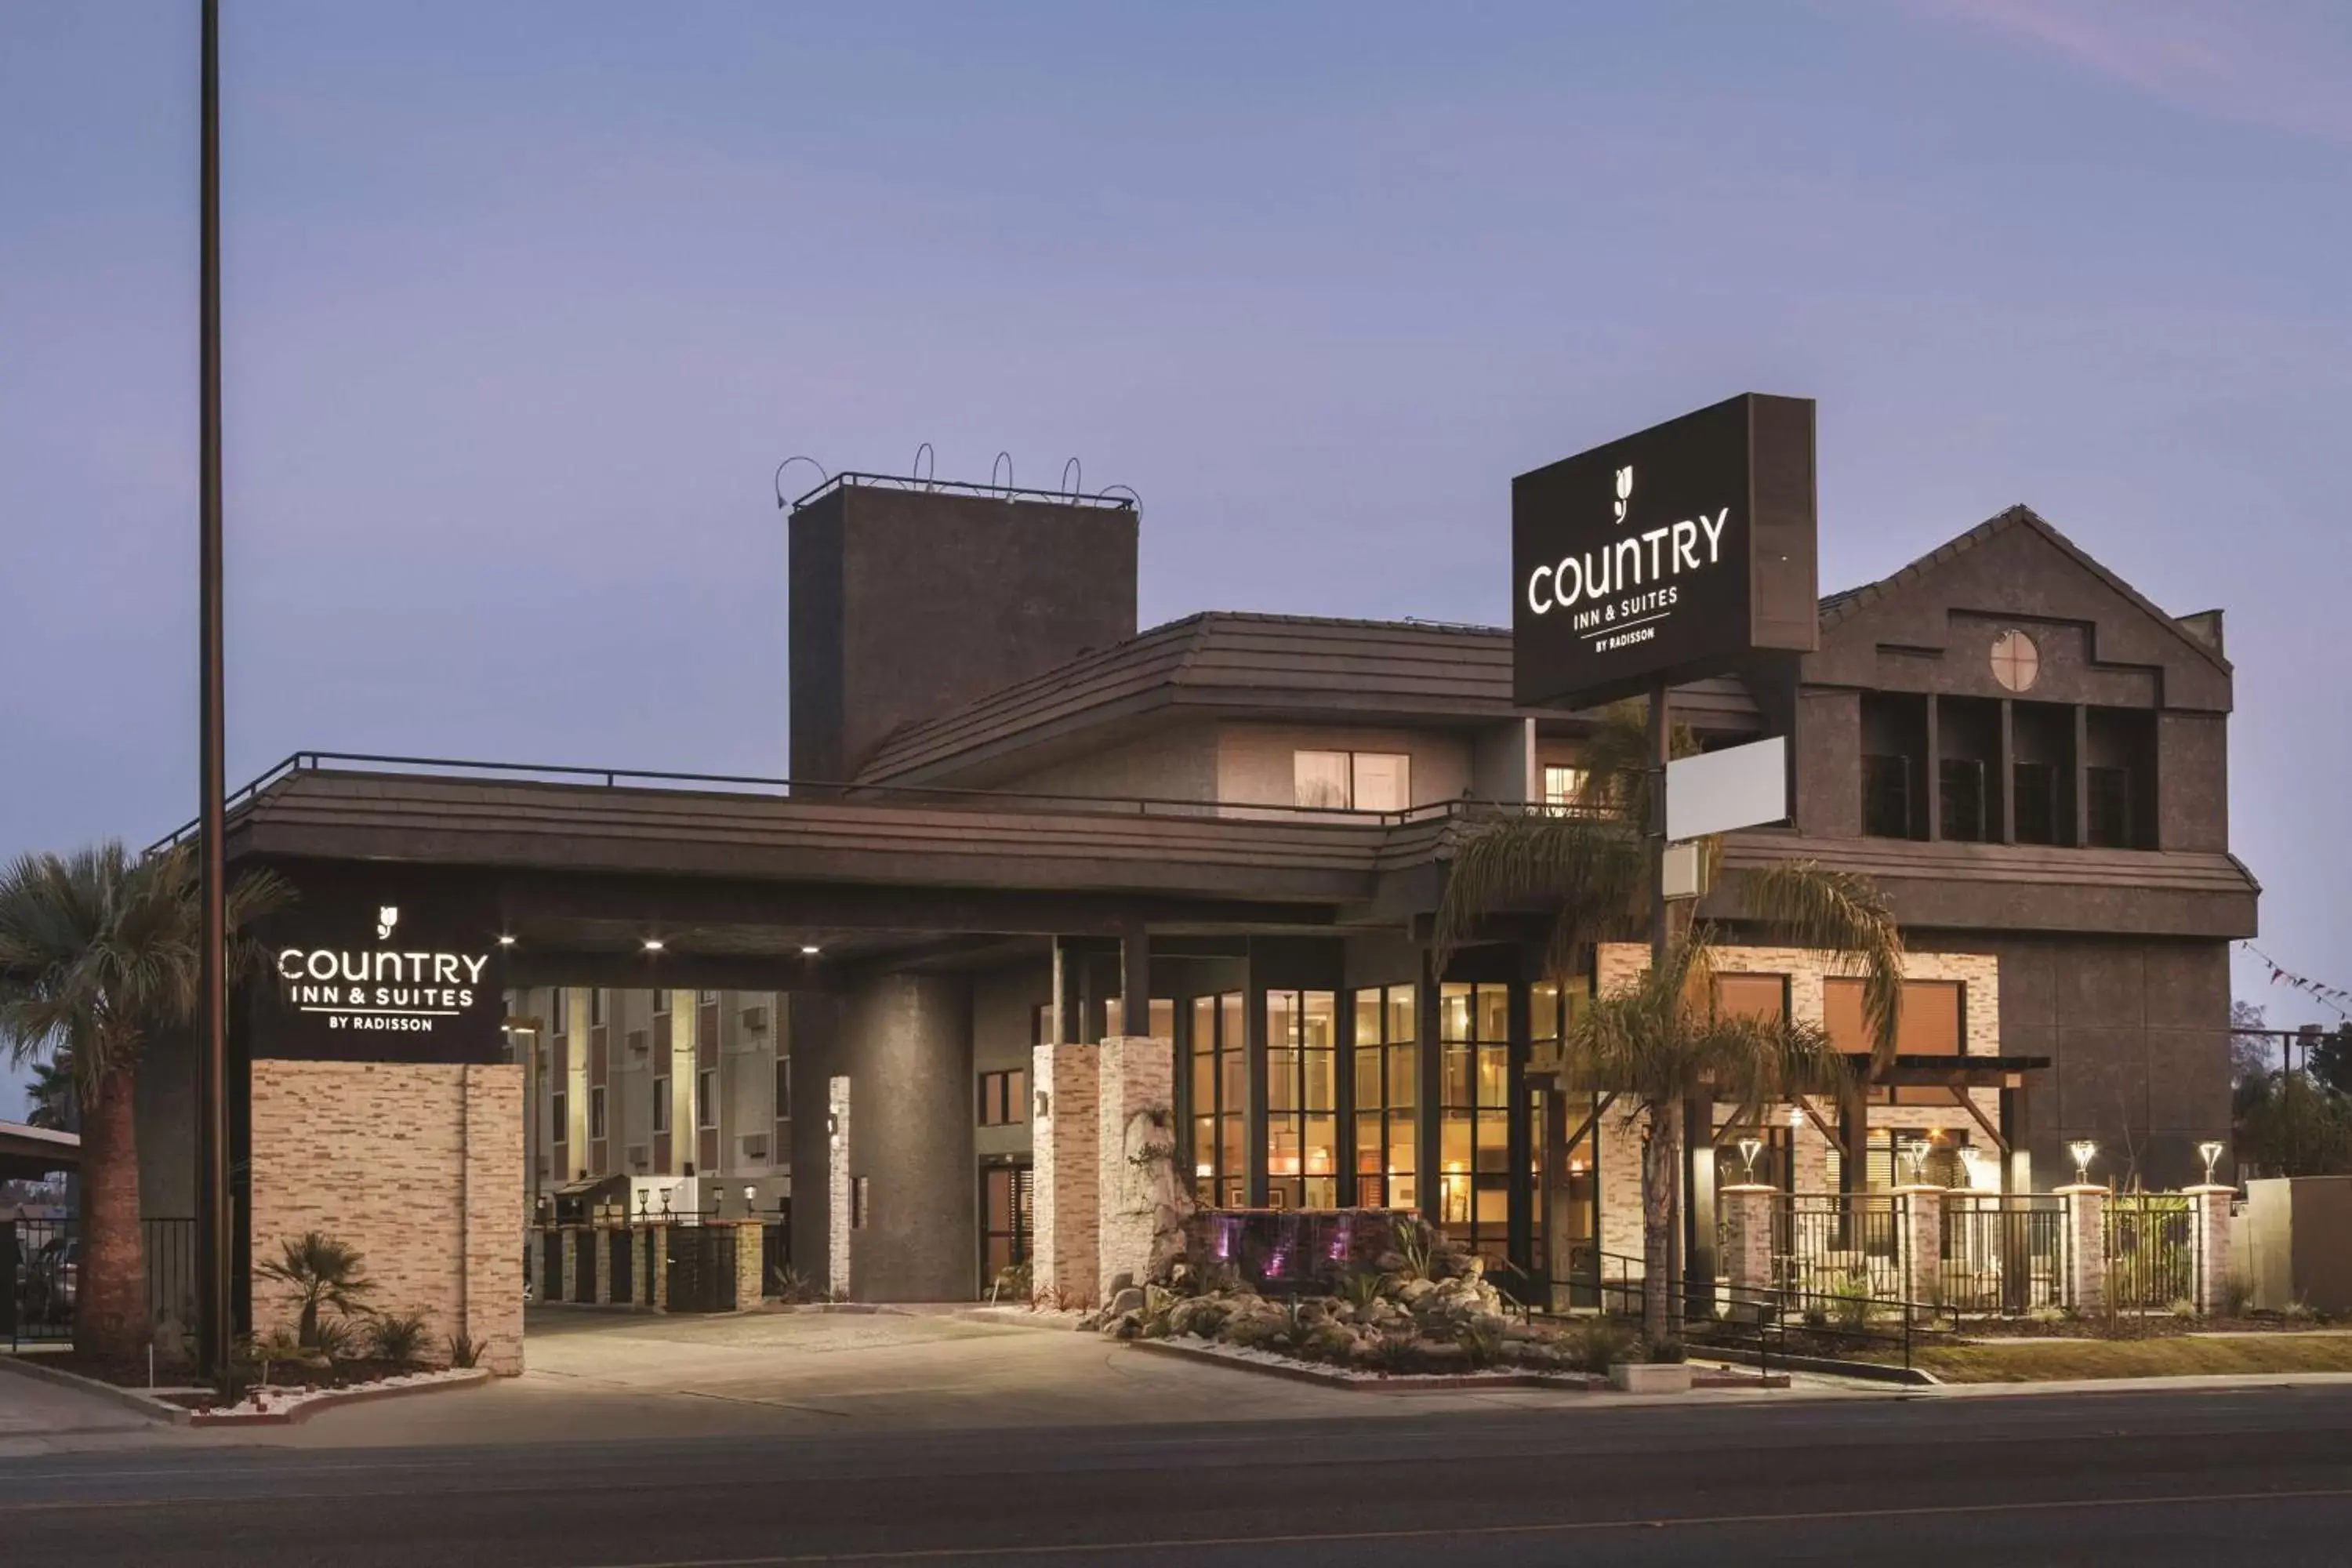 Property building in Country Inn & Suites by Radisson, Bakersfield, CA